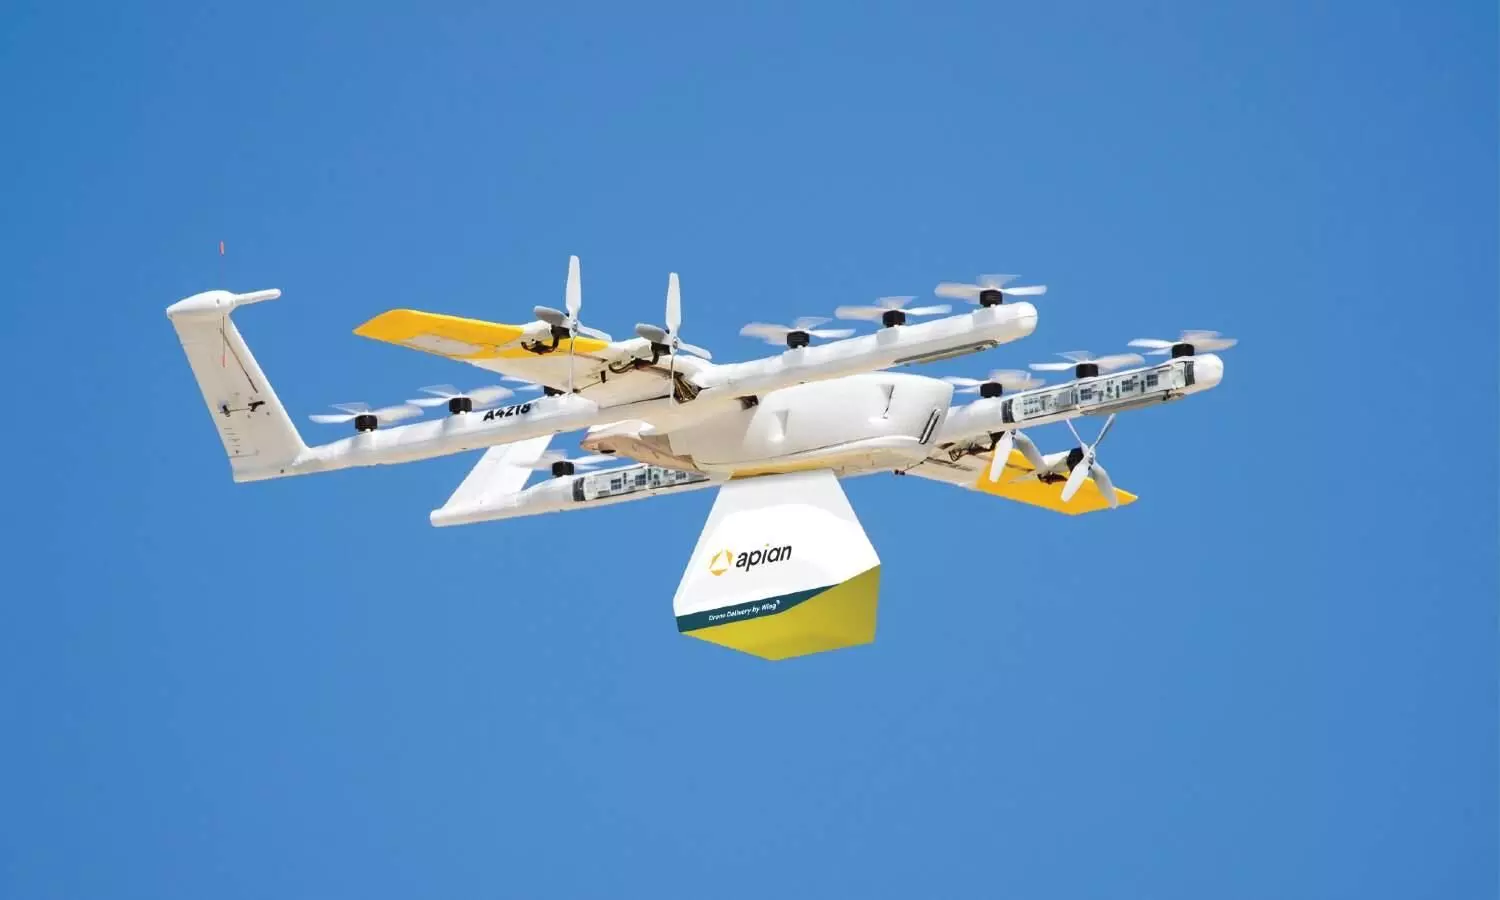 Wing, Apian partner for medical drone delivery service in Ireland